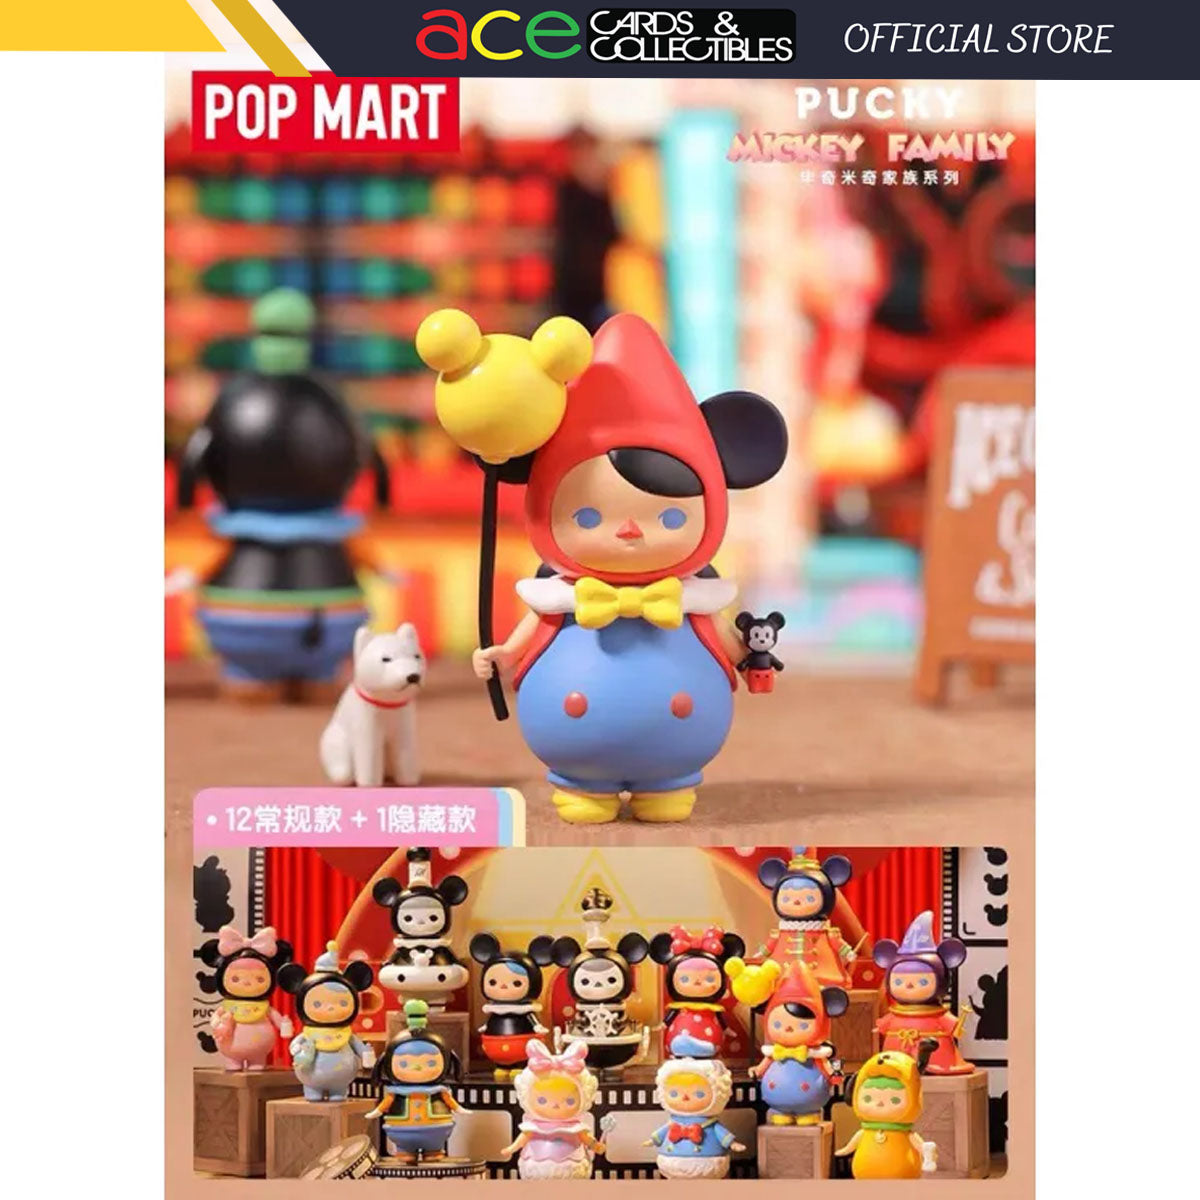 POP MART Pucky Mickey Family Series-Single Box (Random)-Pop Mart-Ace Cards & Collectibles